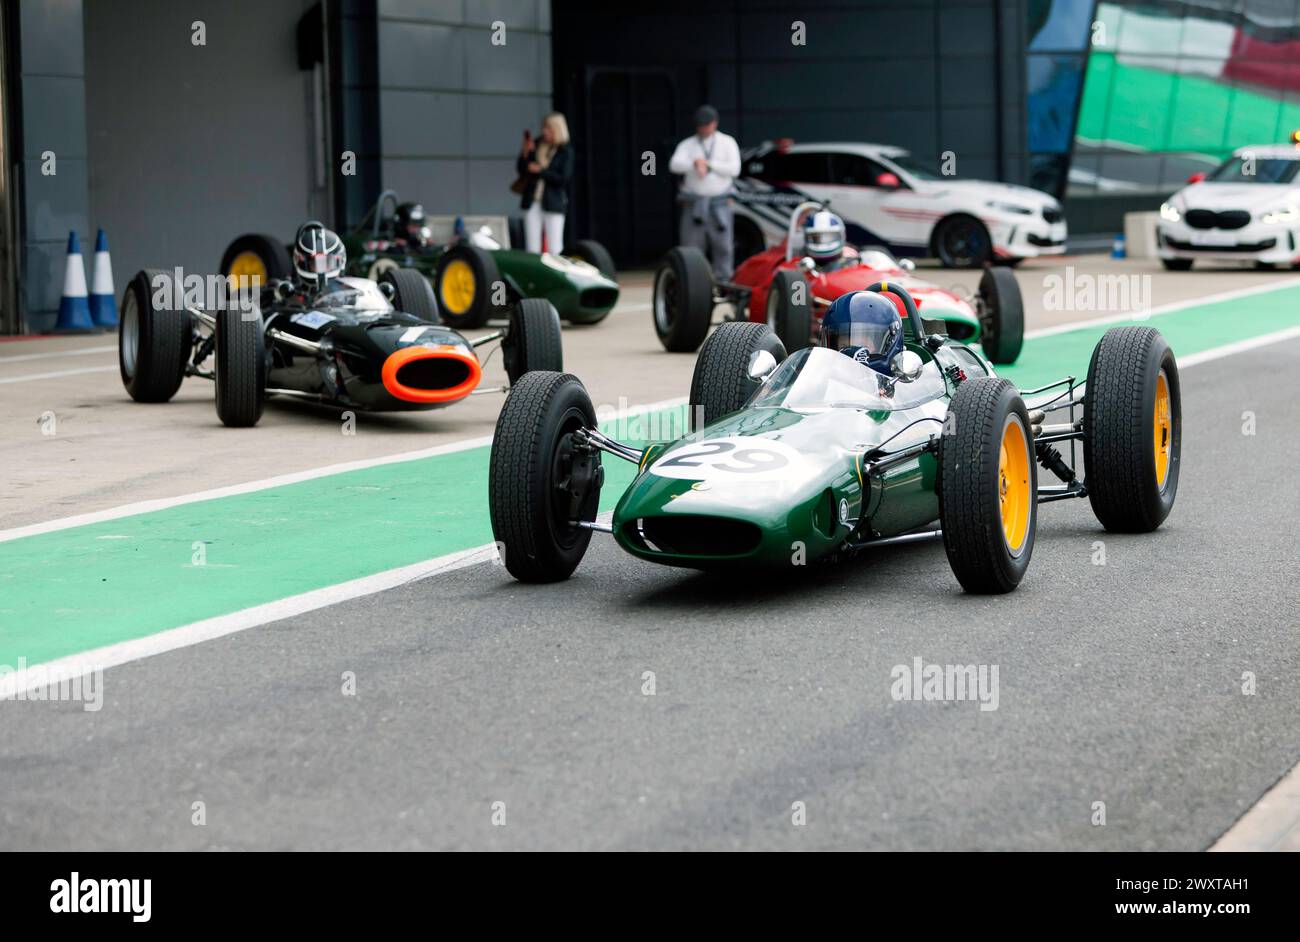 Nick Fennell driving his British Racing Green, 1962, Lotus 25,down the pit lane before the start of the HGPCA Rear-Engined Pre'66 Grand Prix Race Stock Photo